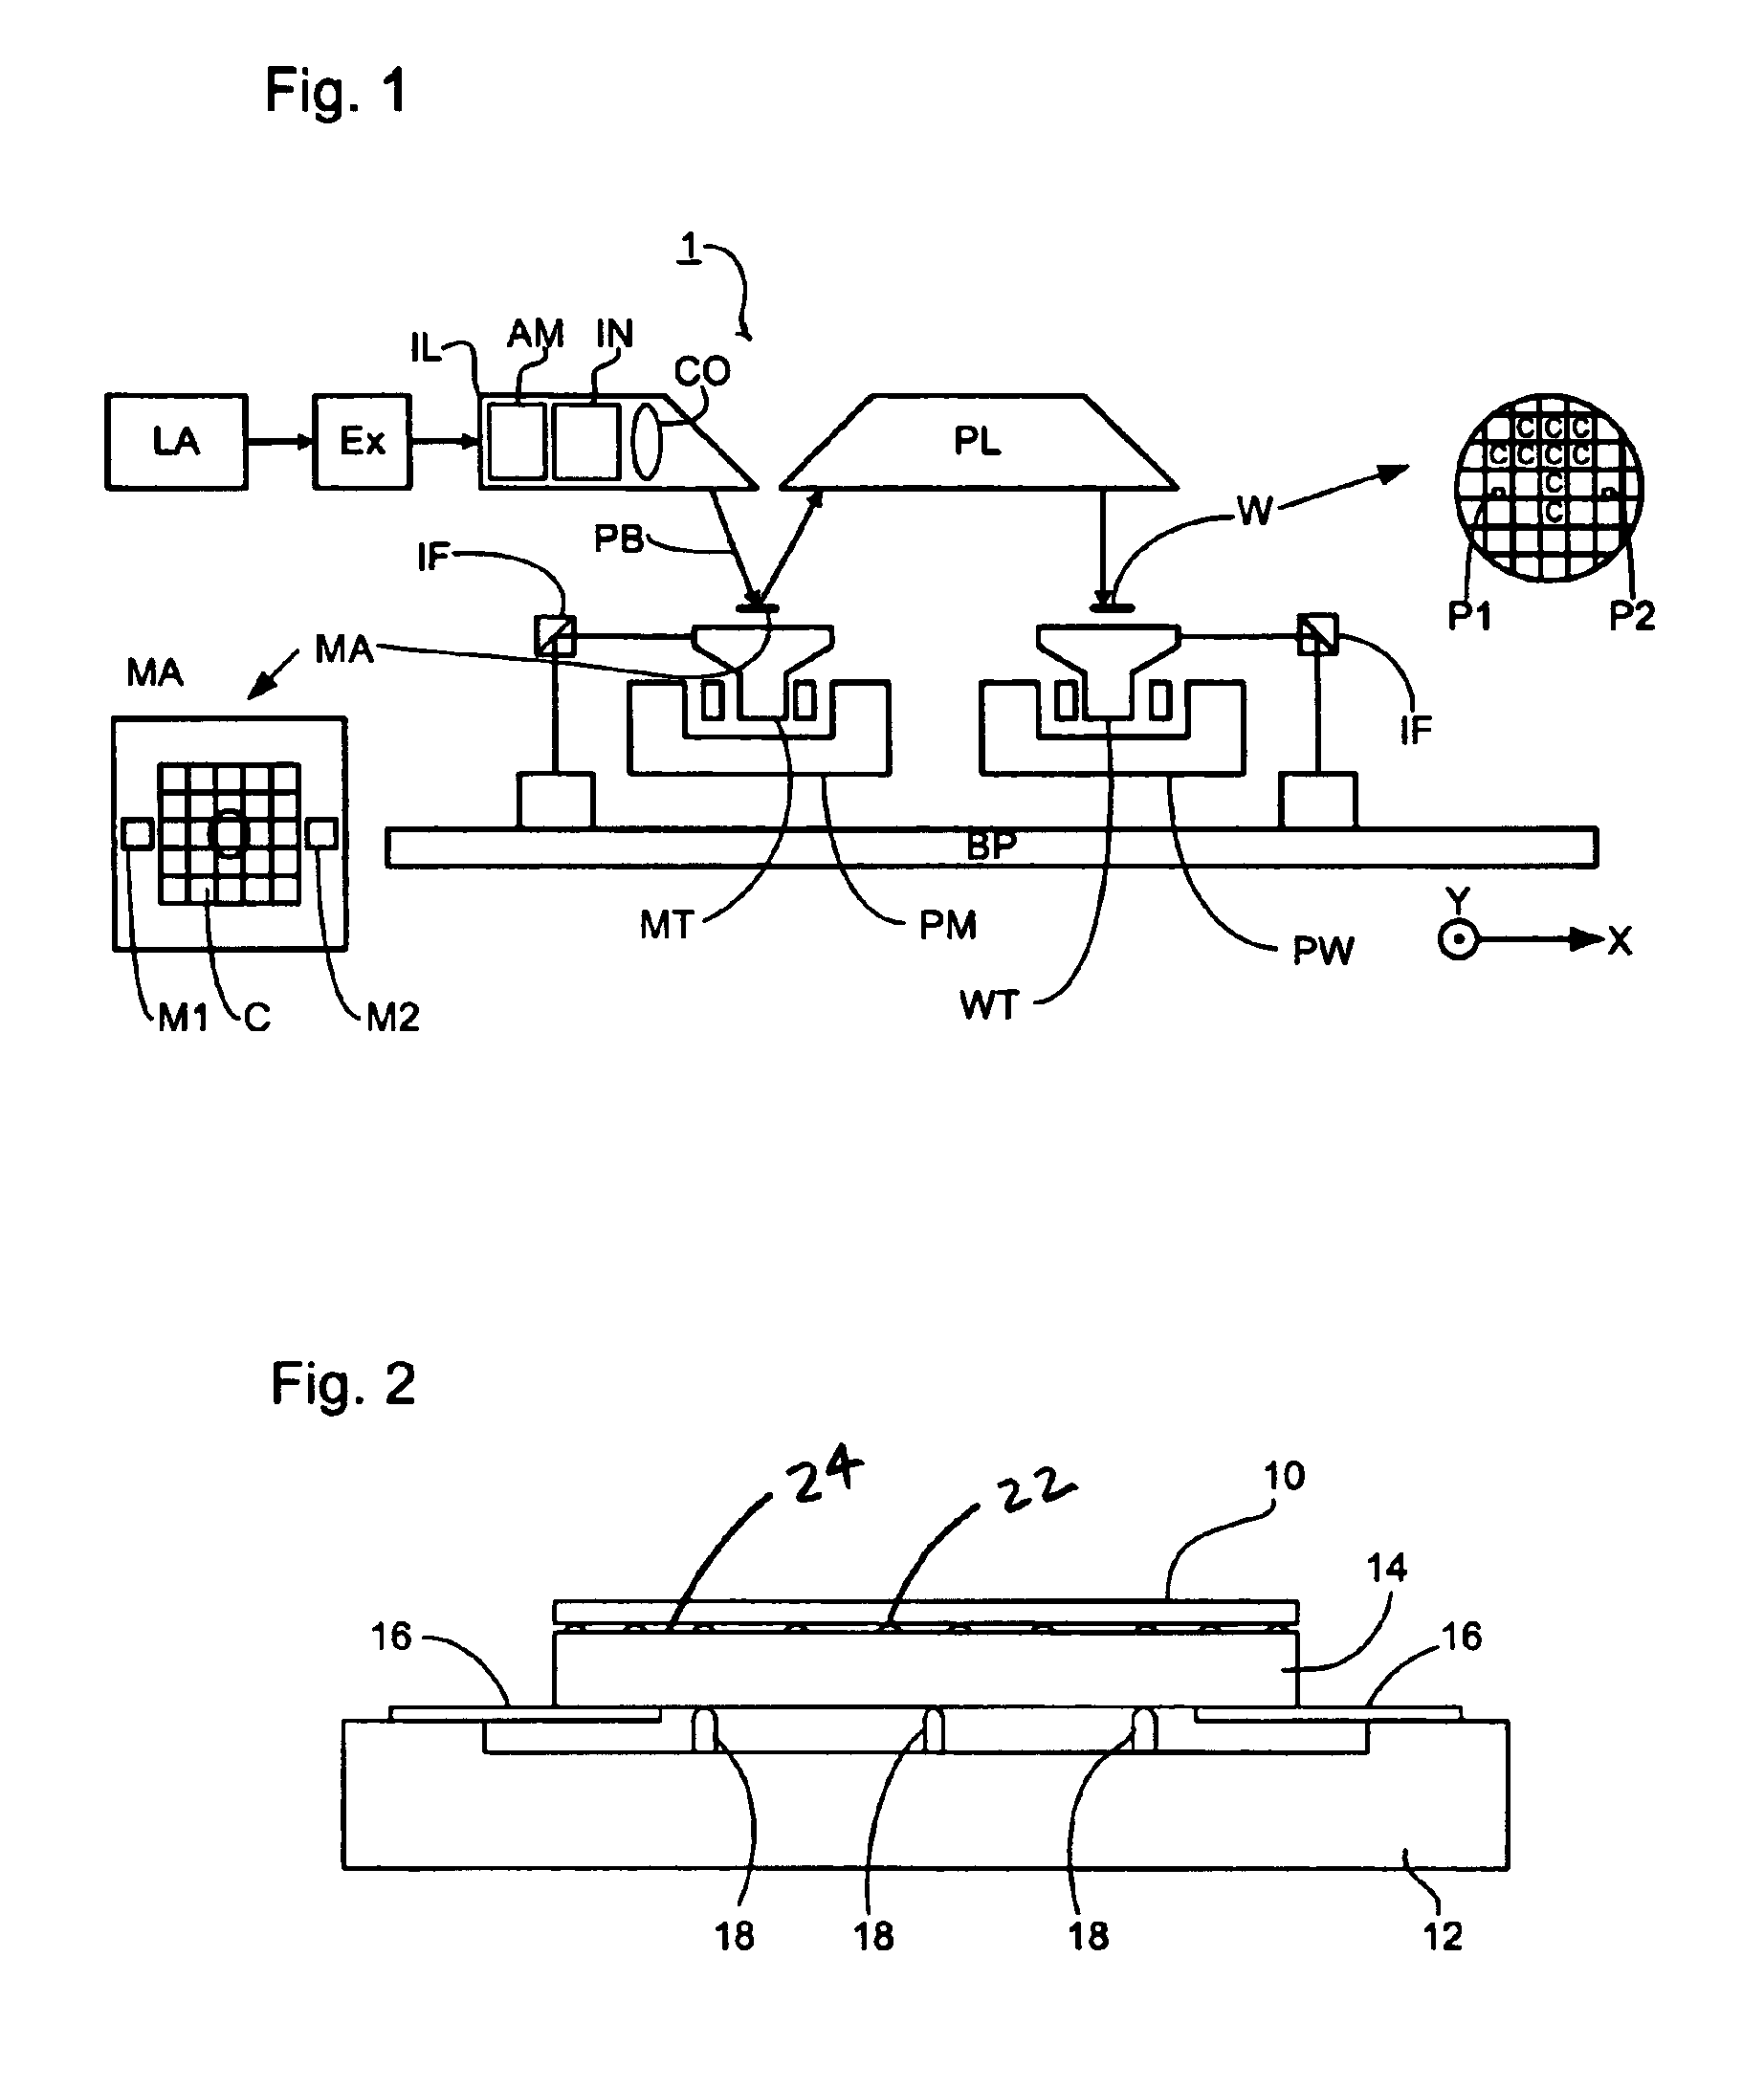 Lithographic apparatus and method of manufacturing a device